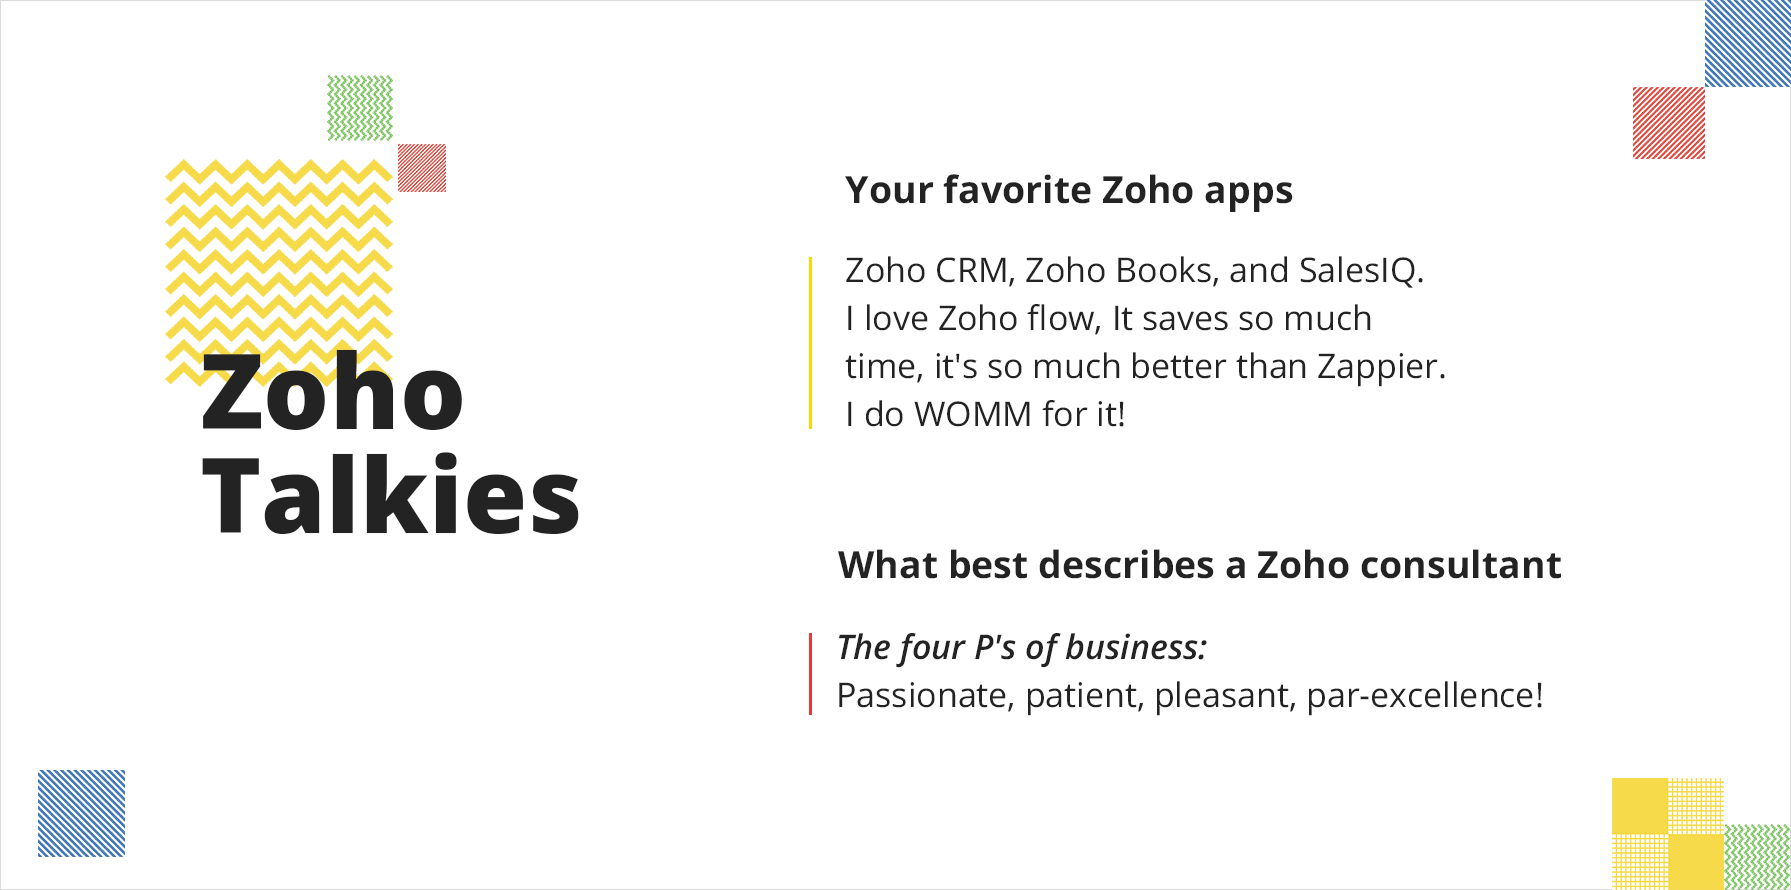 The preferences of Spikra's customers using Zoho software